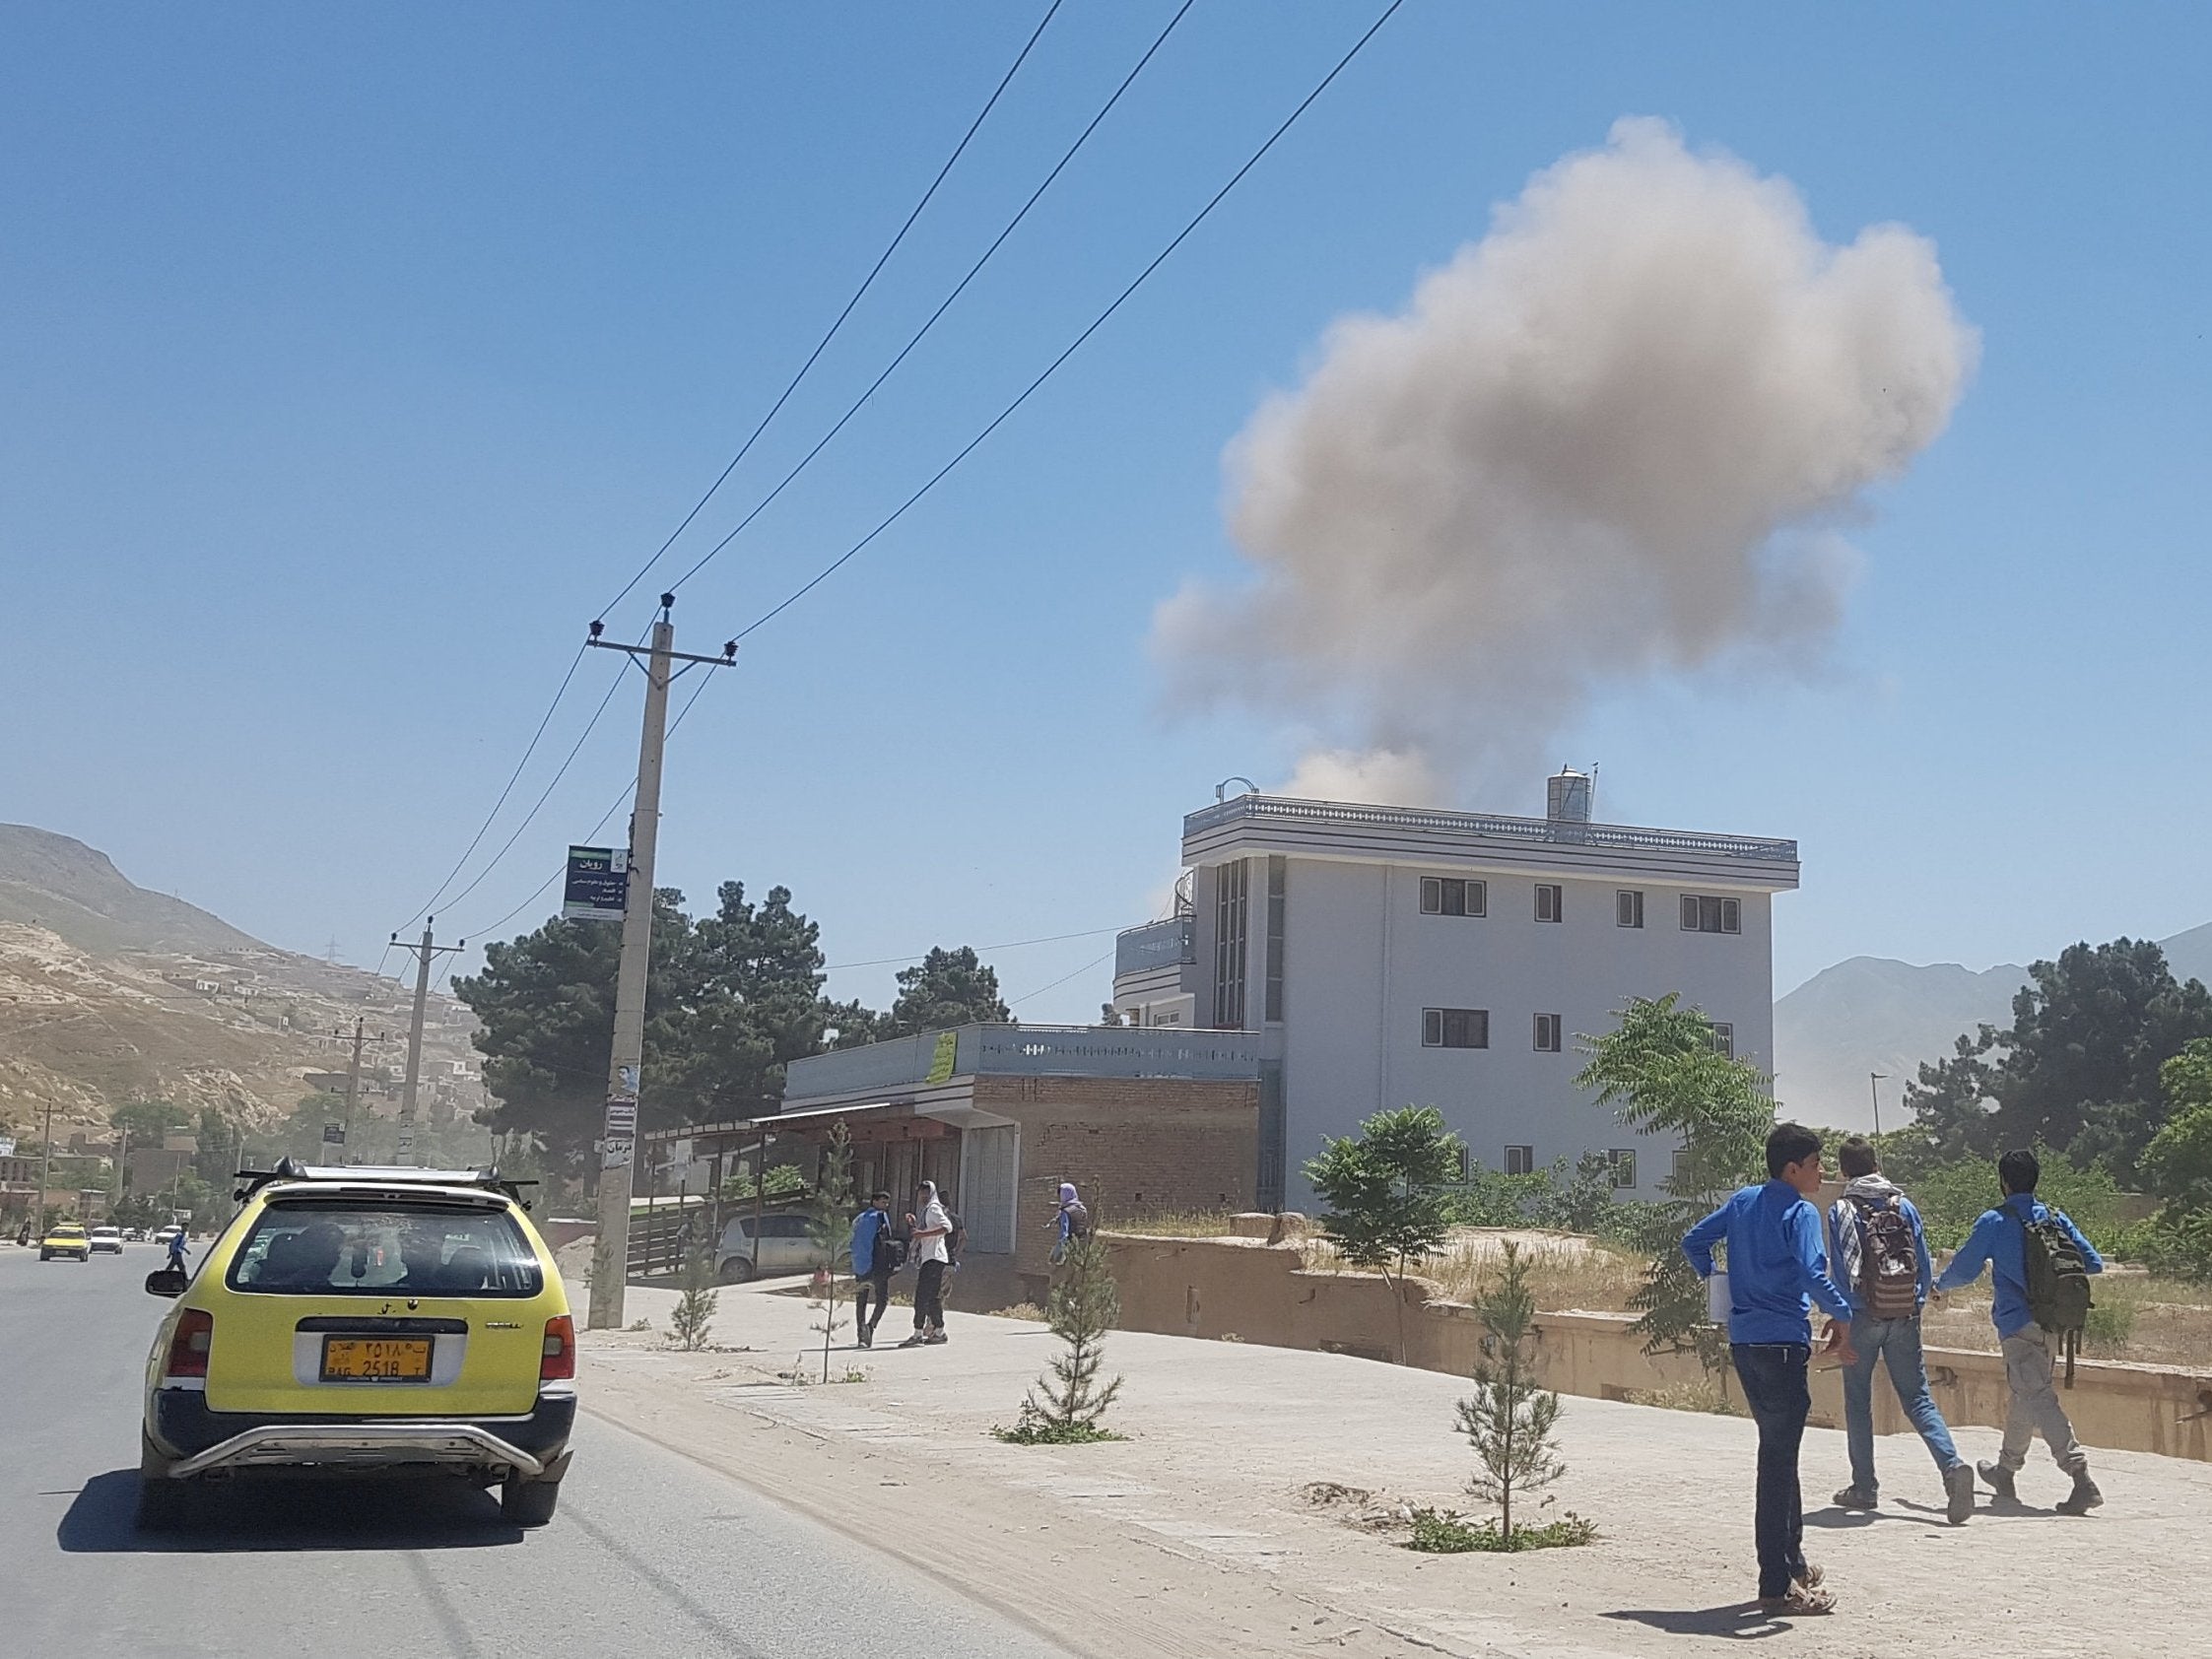 A government official said the bomber blew up a Humvee loaded with explosives outside the police headquarters in Pul-e-Khumri